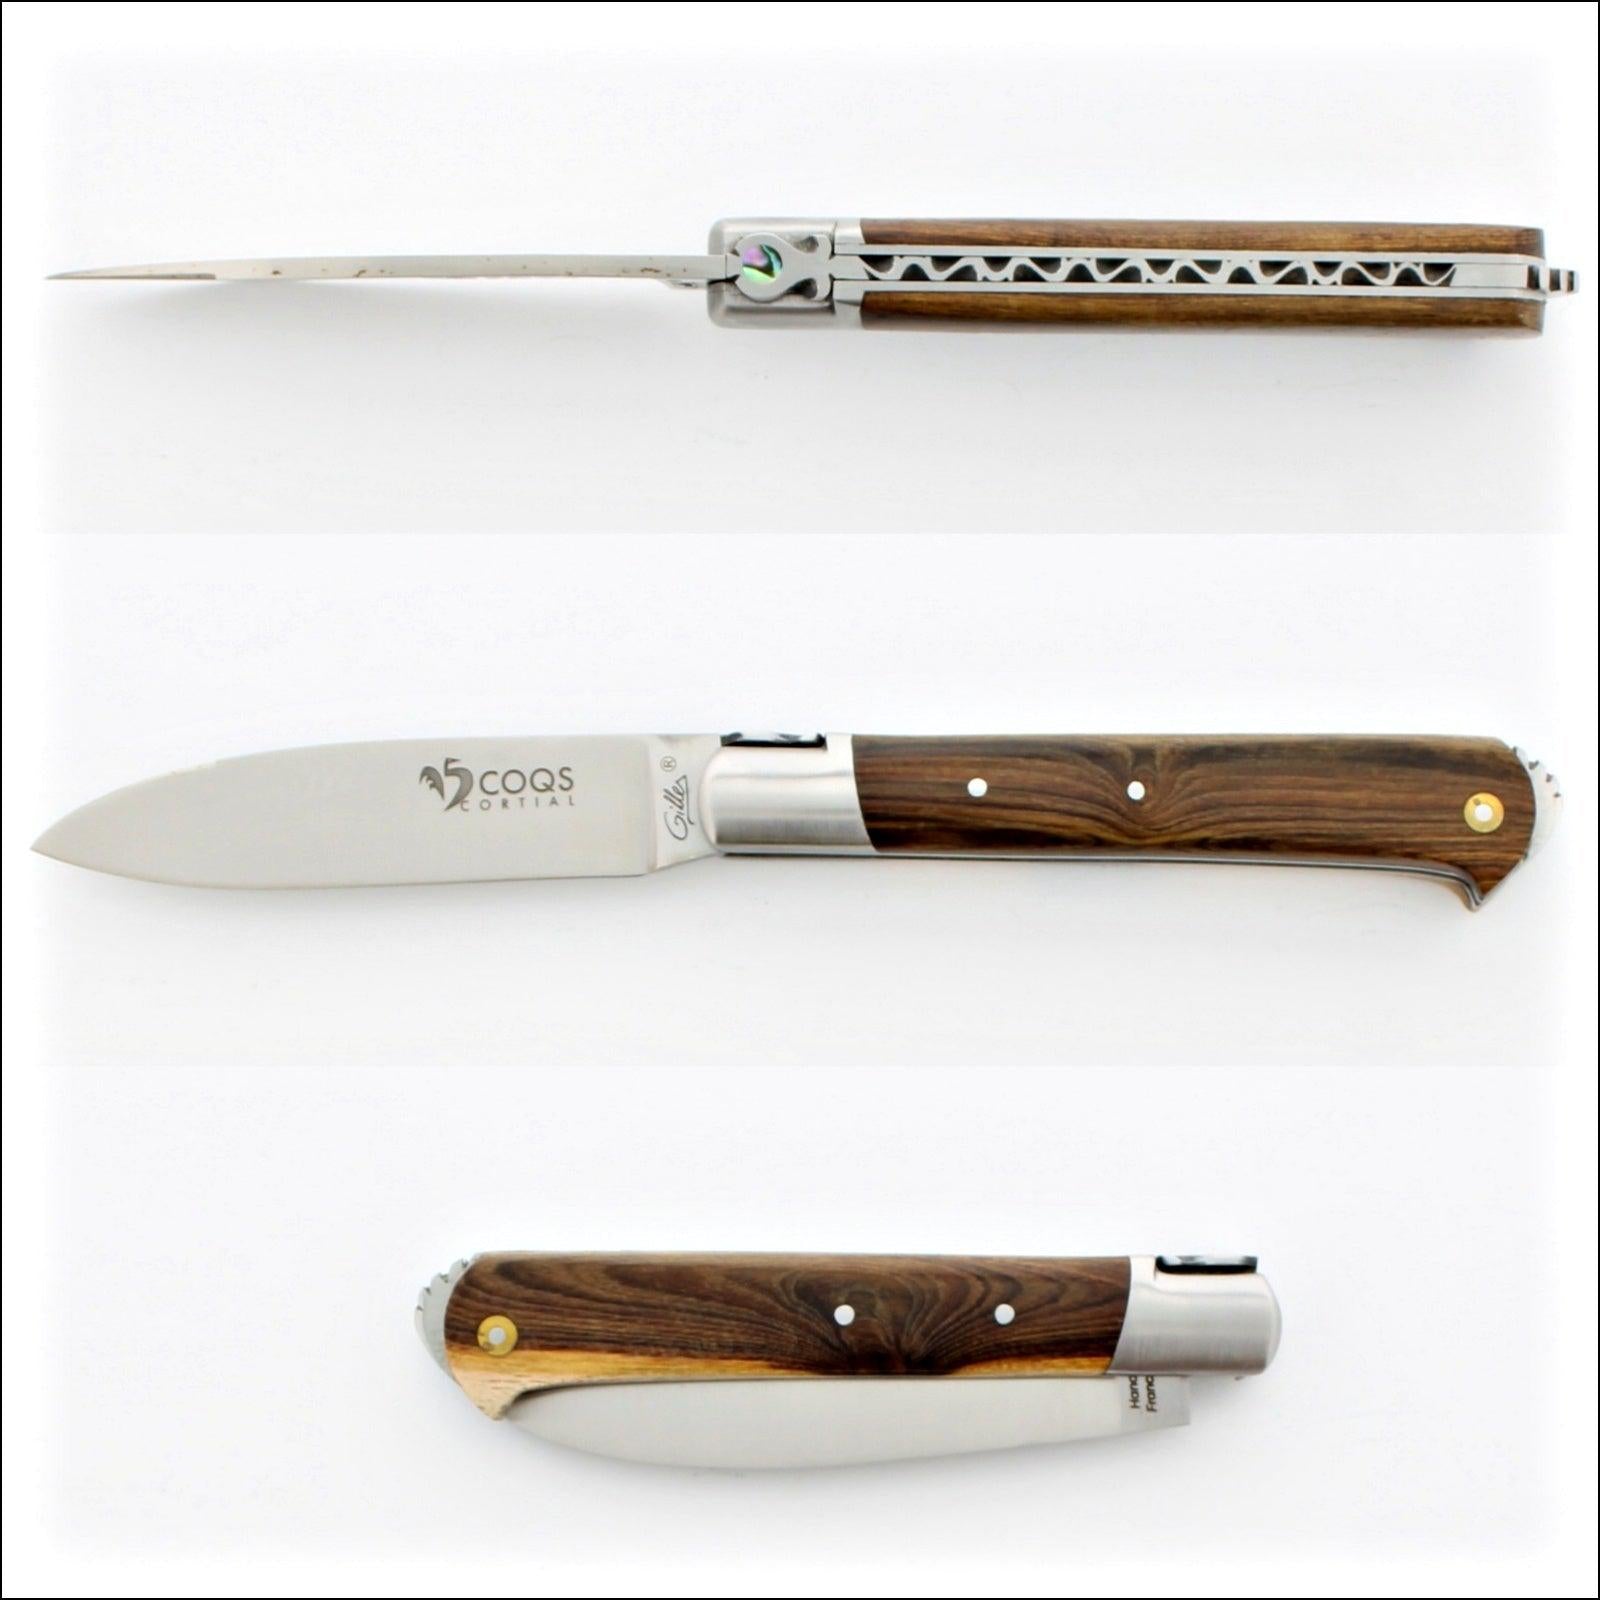 5 Coqs Pocket Knife - Pistachio wood & Mother of Pearl Inlay